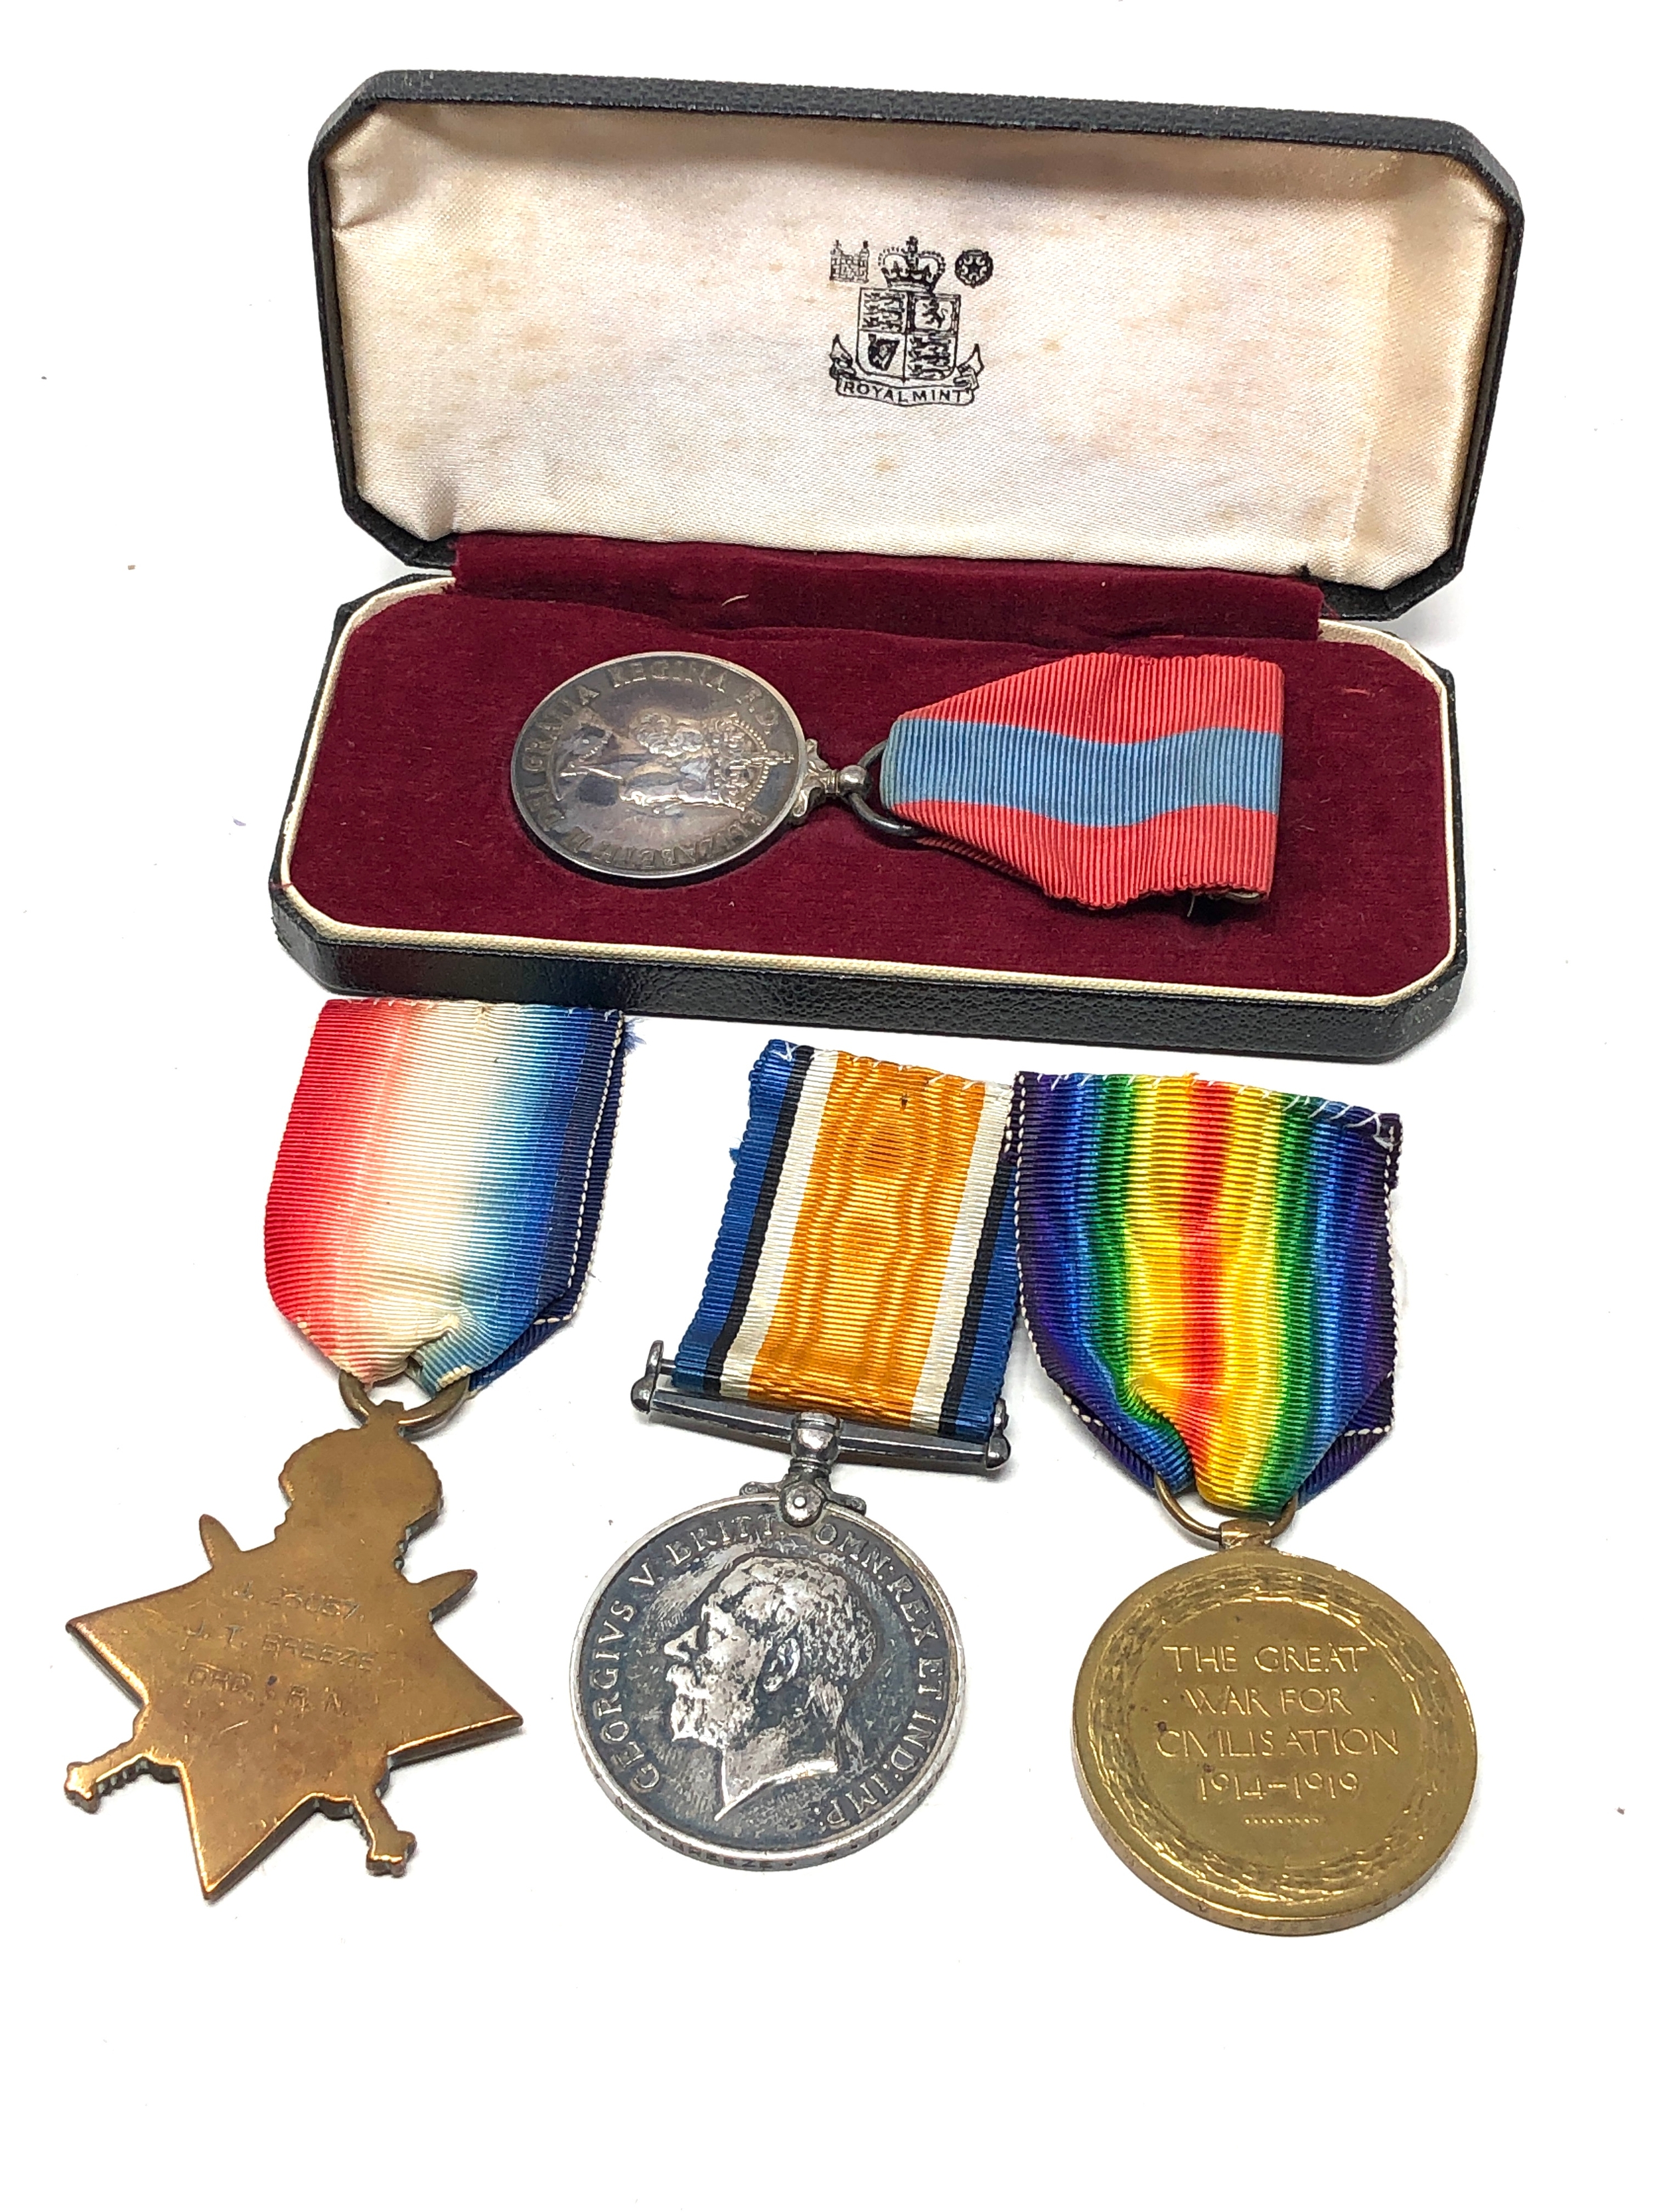 ww1 trio medals & imperial service medal to j.23057 j.t.breeze ord r.n - Image 2 of 2